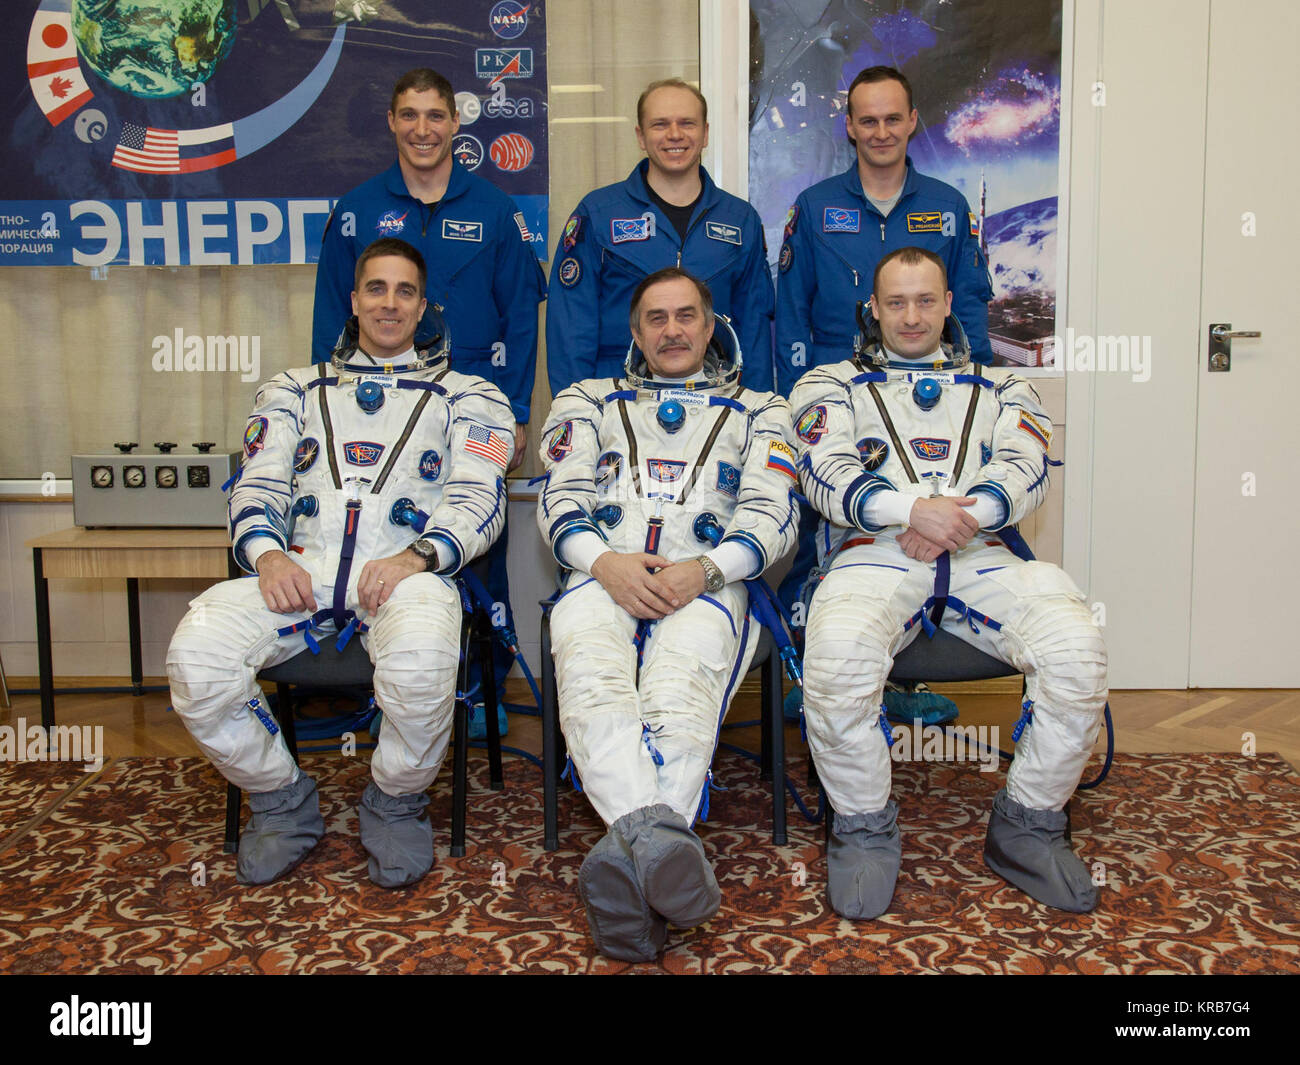 In the Integration Facility at the Baikonur Cosmodrome in Kazakhstan, the Expedition 35-36 prime and backup crews pose for pictures March 17 during a systems dress rehearsal called a “fit check”. Left to right in the front row is the prime crew ---  NASA Flight Engineer Chris Cassidy, Soyuz Commander Pavel Vinogradov and Flight Engineer Alexander Misurkin. Left to the right in the back row are backup crewmembers Michael Hopkins of NASA, Oleg Kotov and Sergey Ryazanskiy. Cassidy, Vinogradov and Misurkin are preparing for launch to the International Space Station from Baikonur on March 29, Kazak Stock Photo